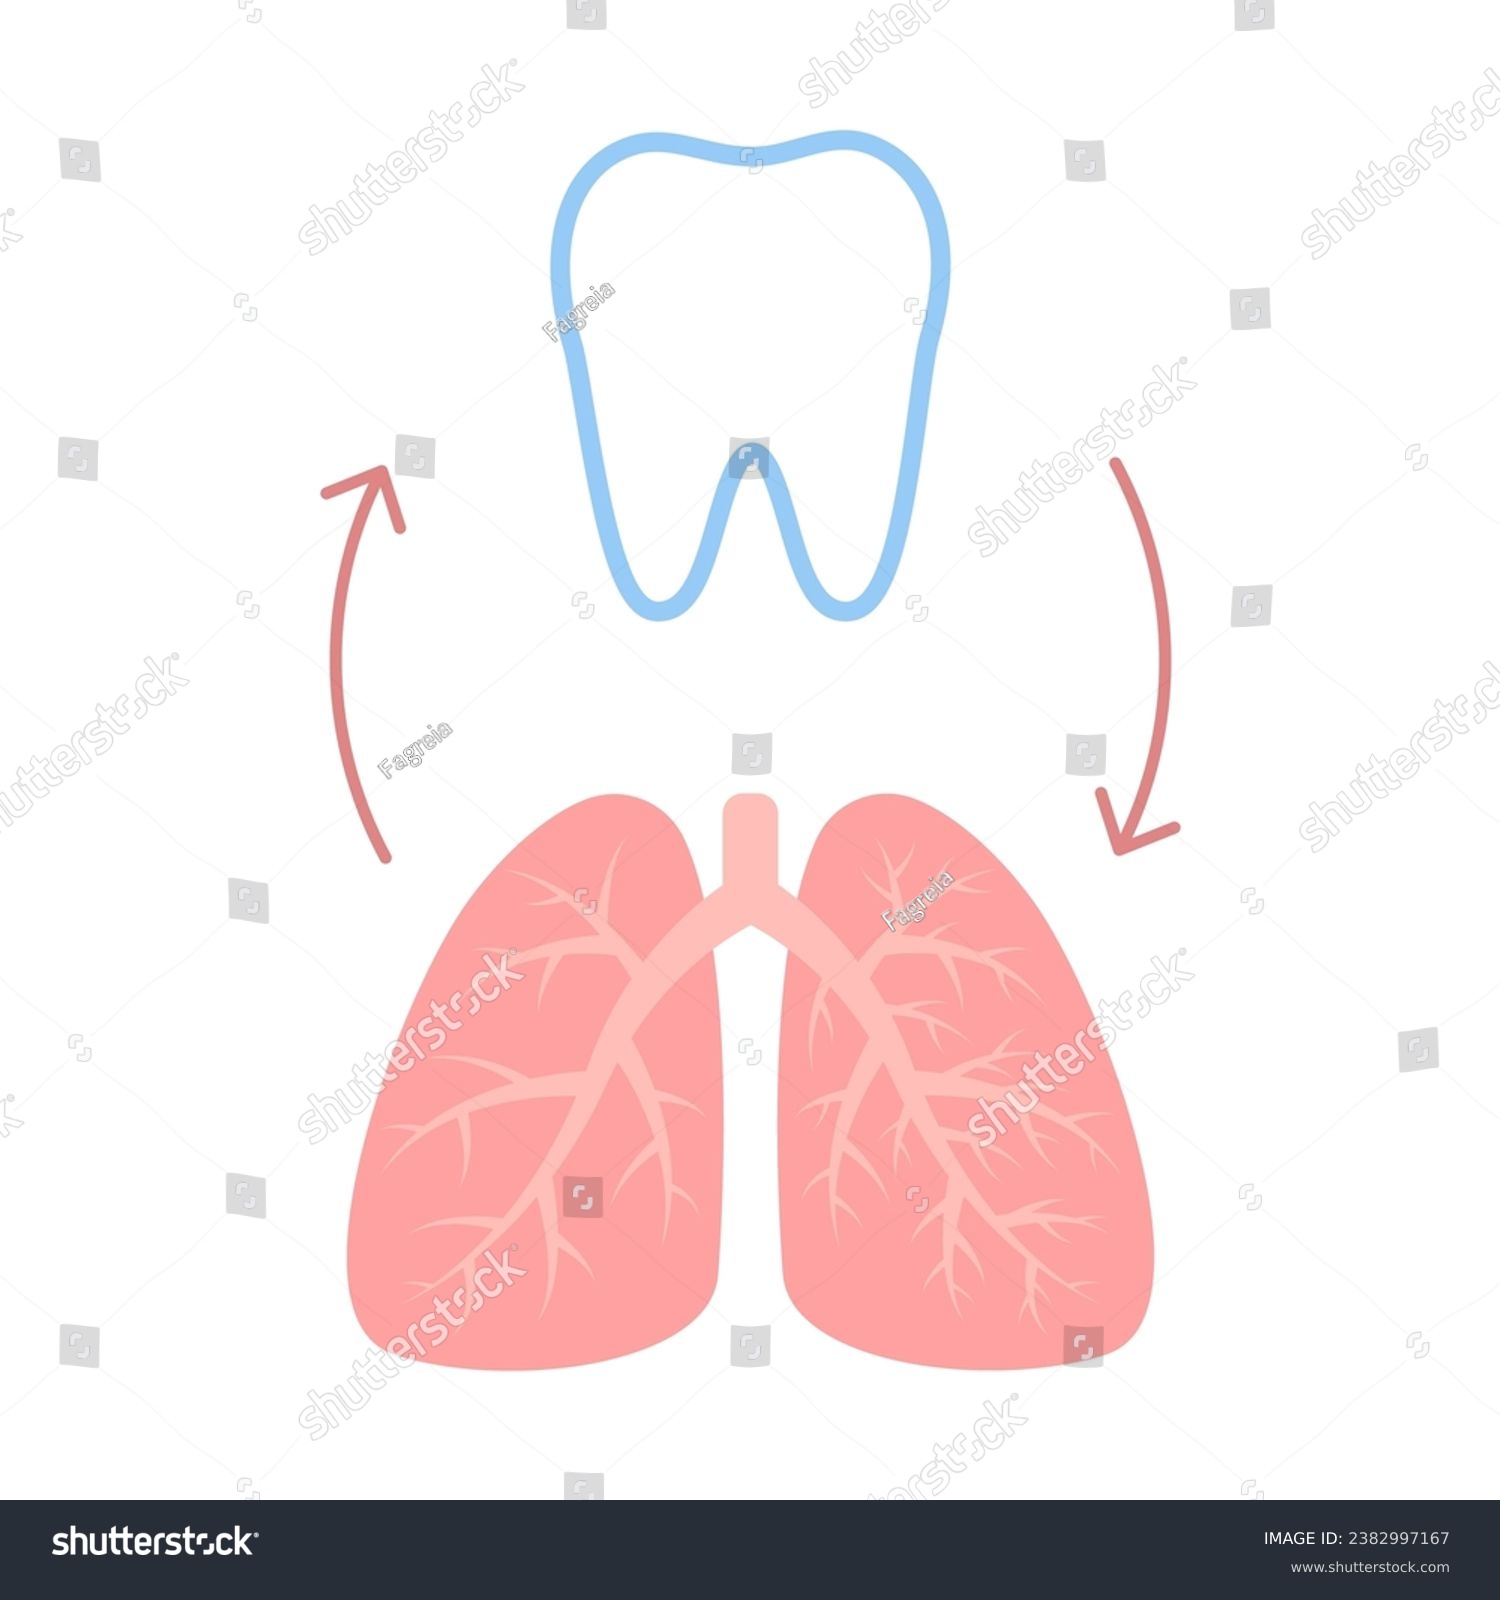 SVG of Connection of healthy teeth and lungs. Relation health of human breathing and tooth. Respiratory and chewing unity. Vector illustration svg